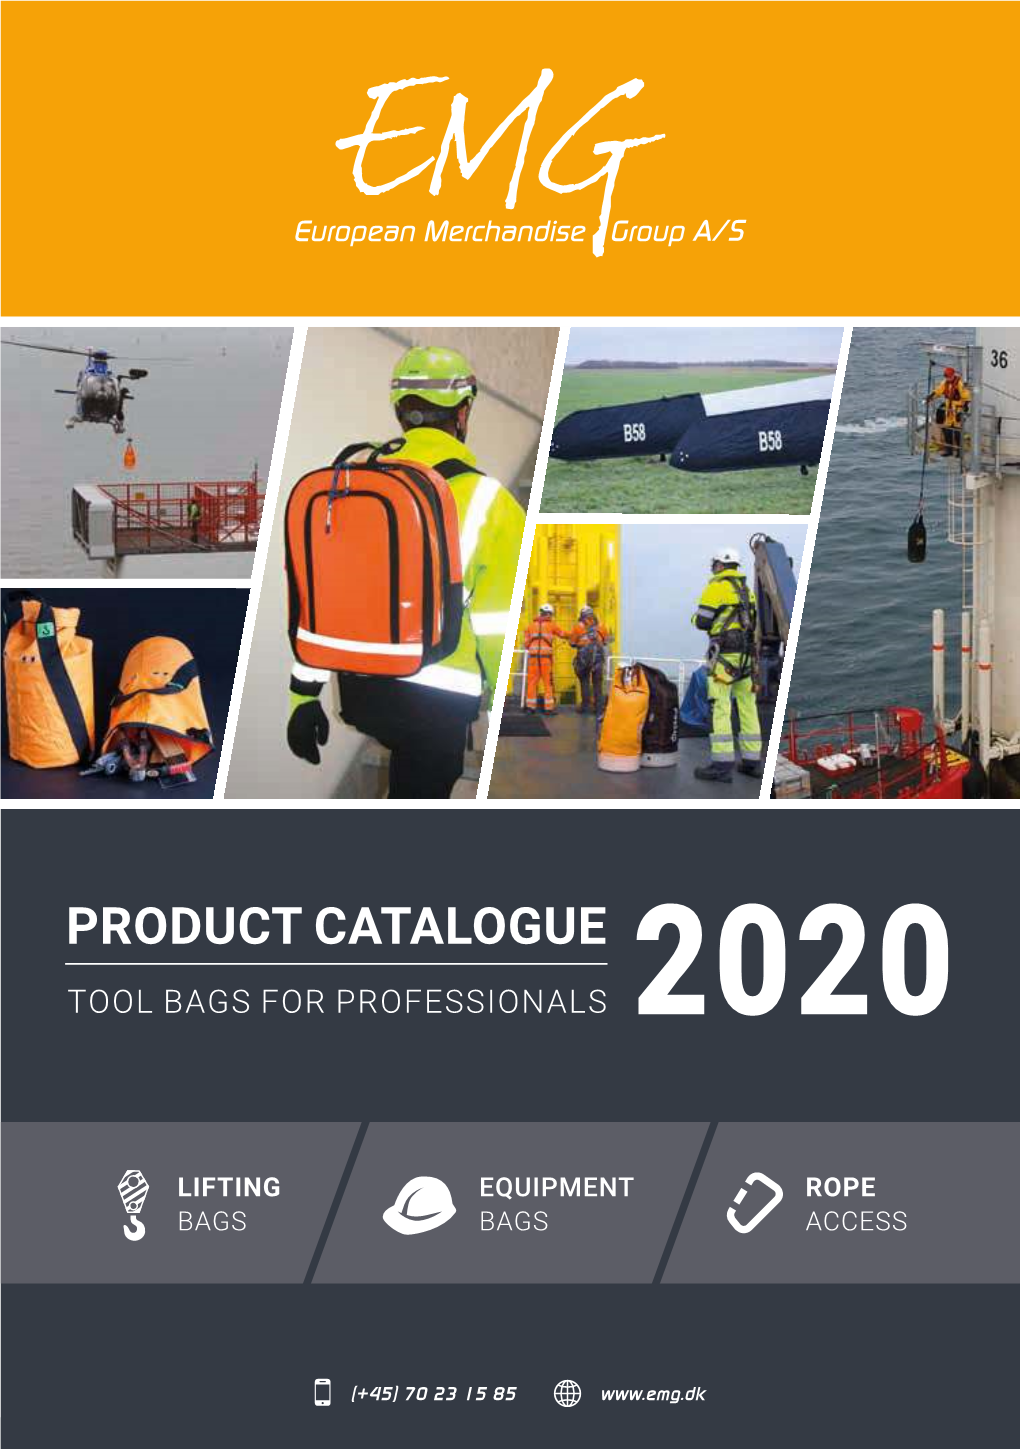 Product Catalogue Tool Bags for Professionals 2020